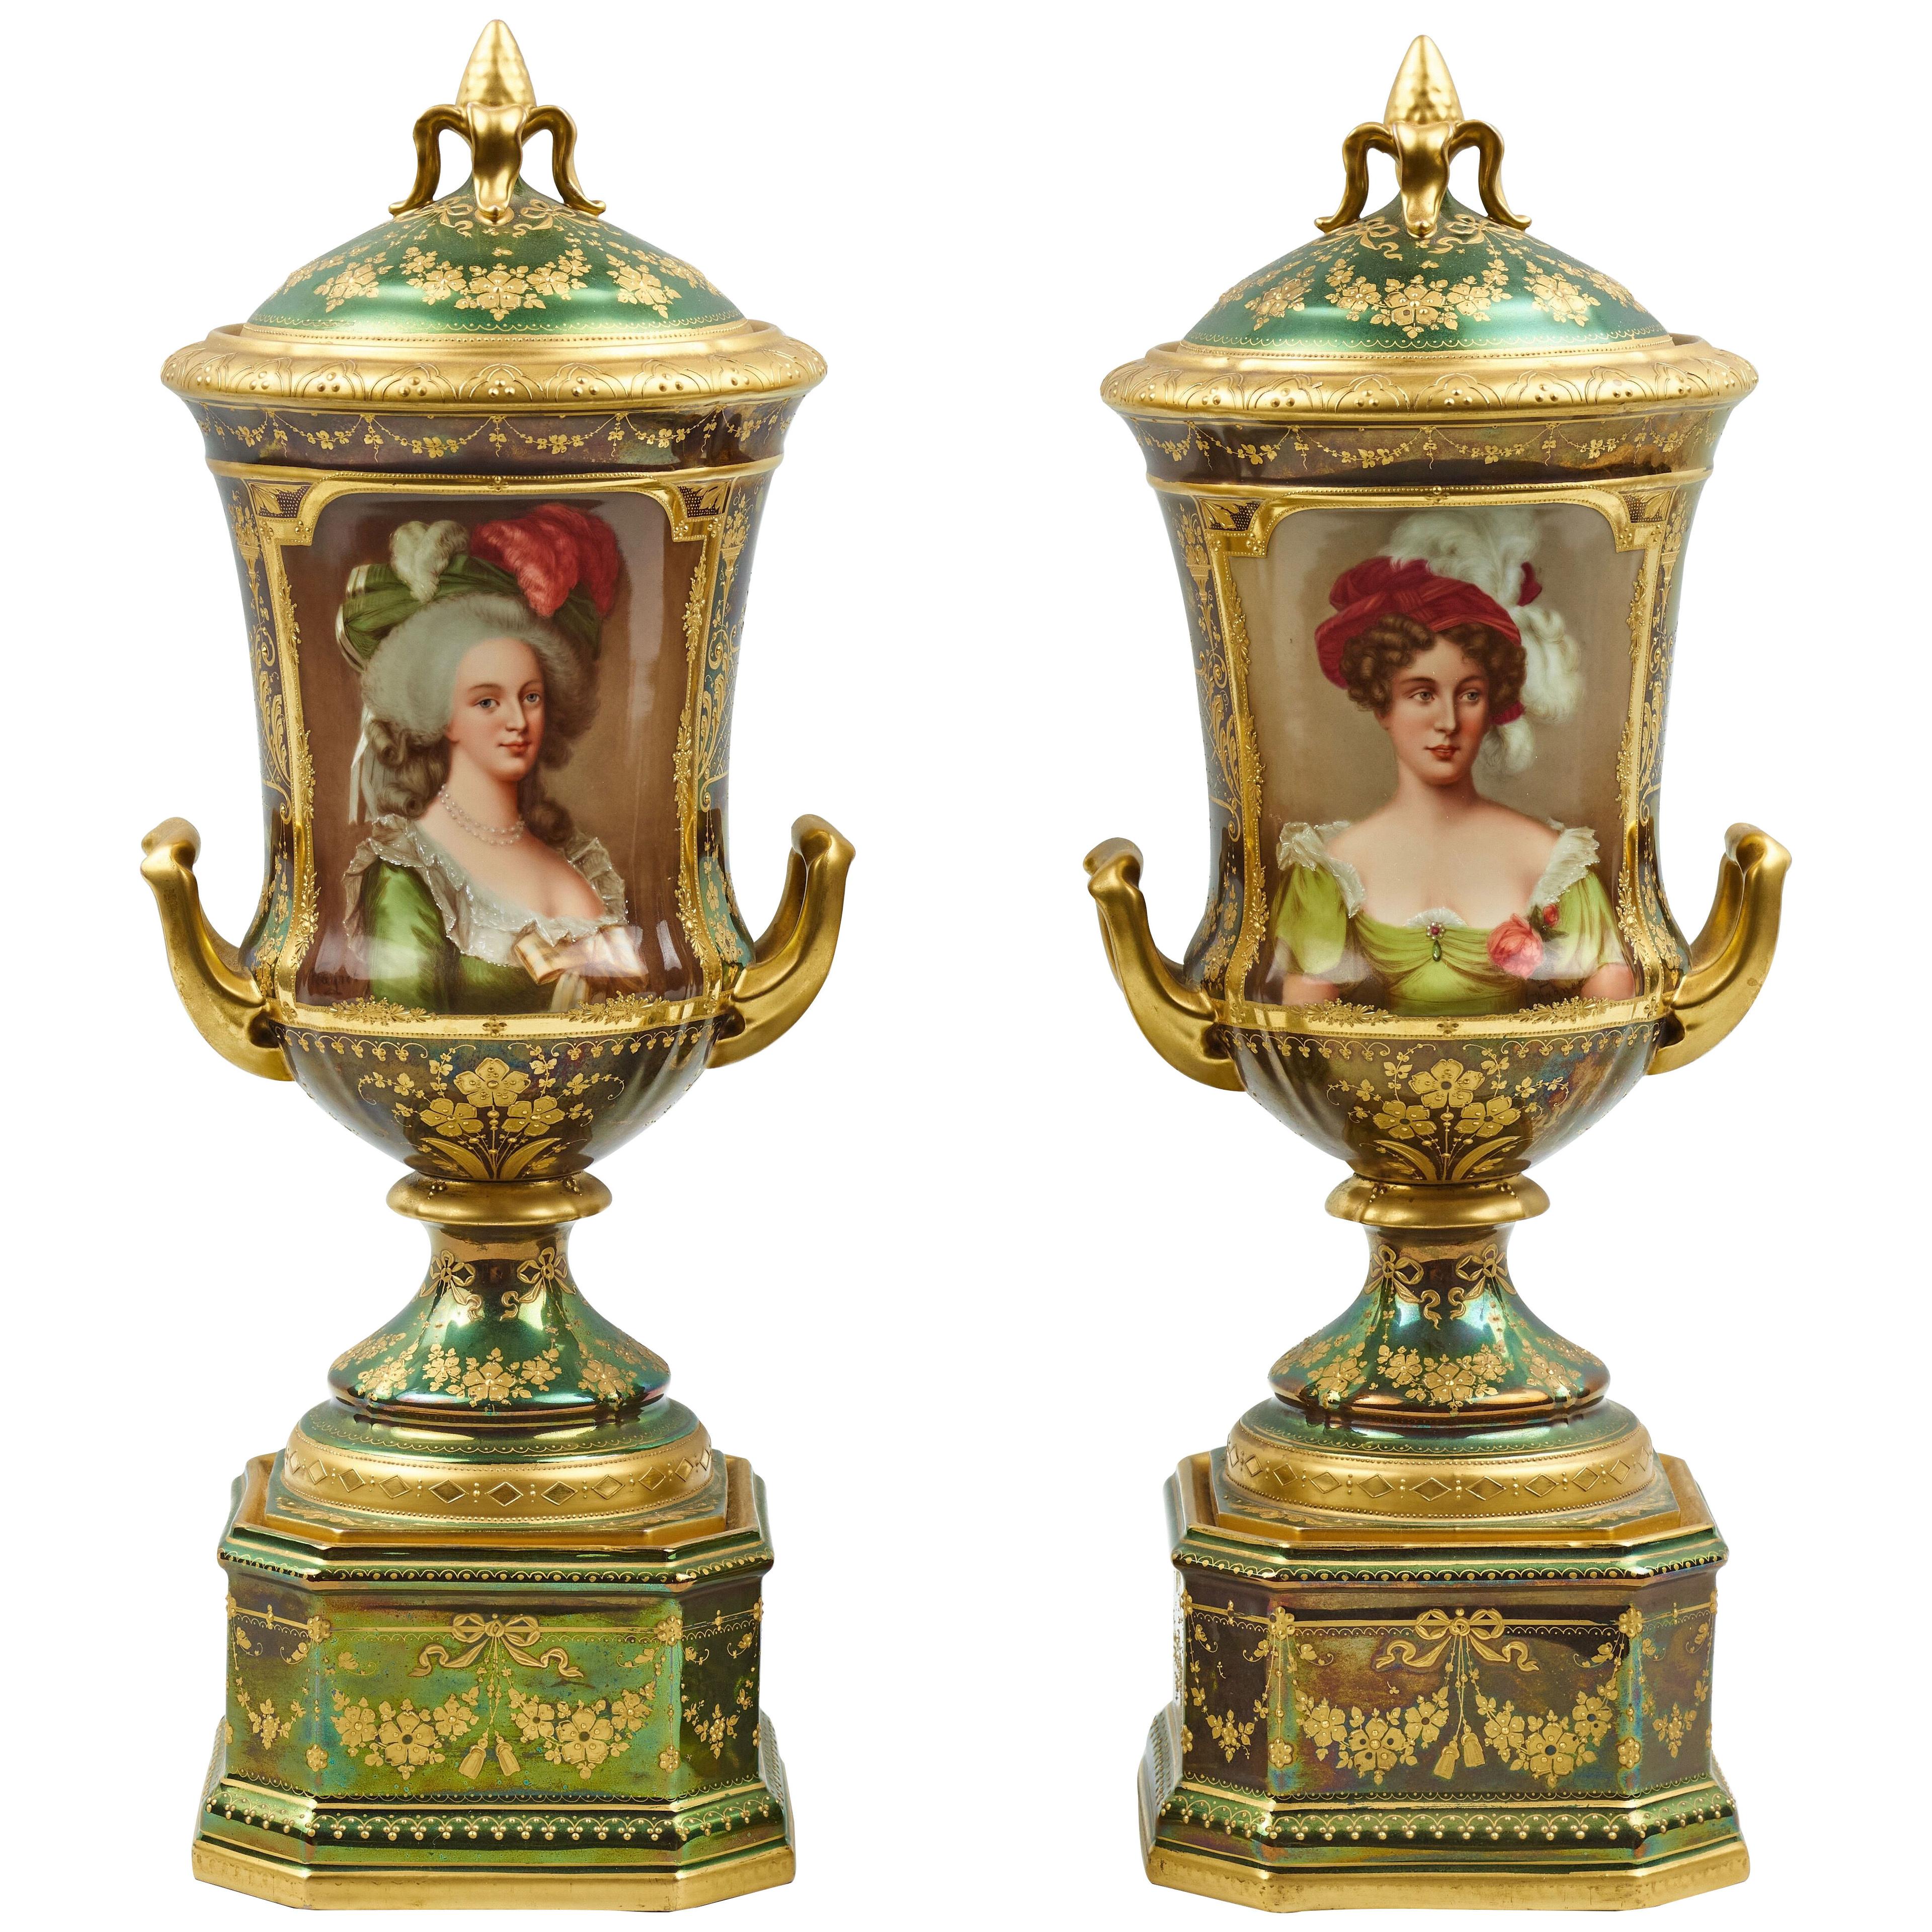 A Pair of Royal Vienna Porcelain Urns, late 19th Century